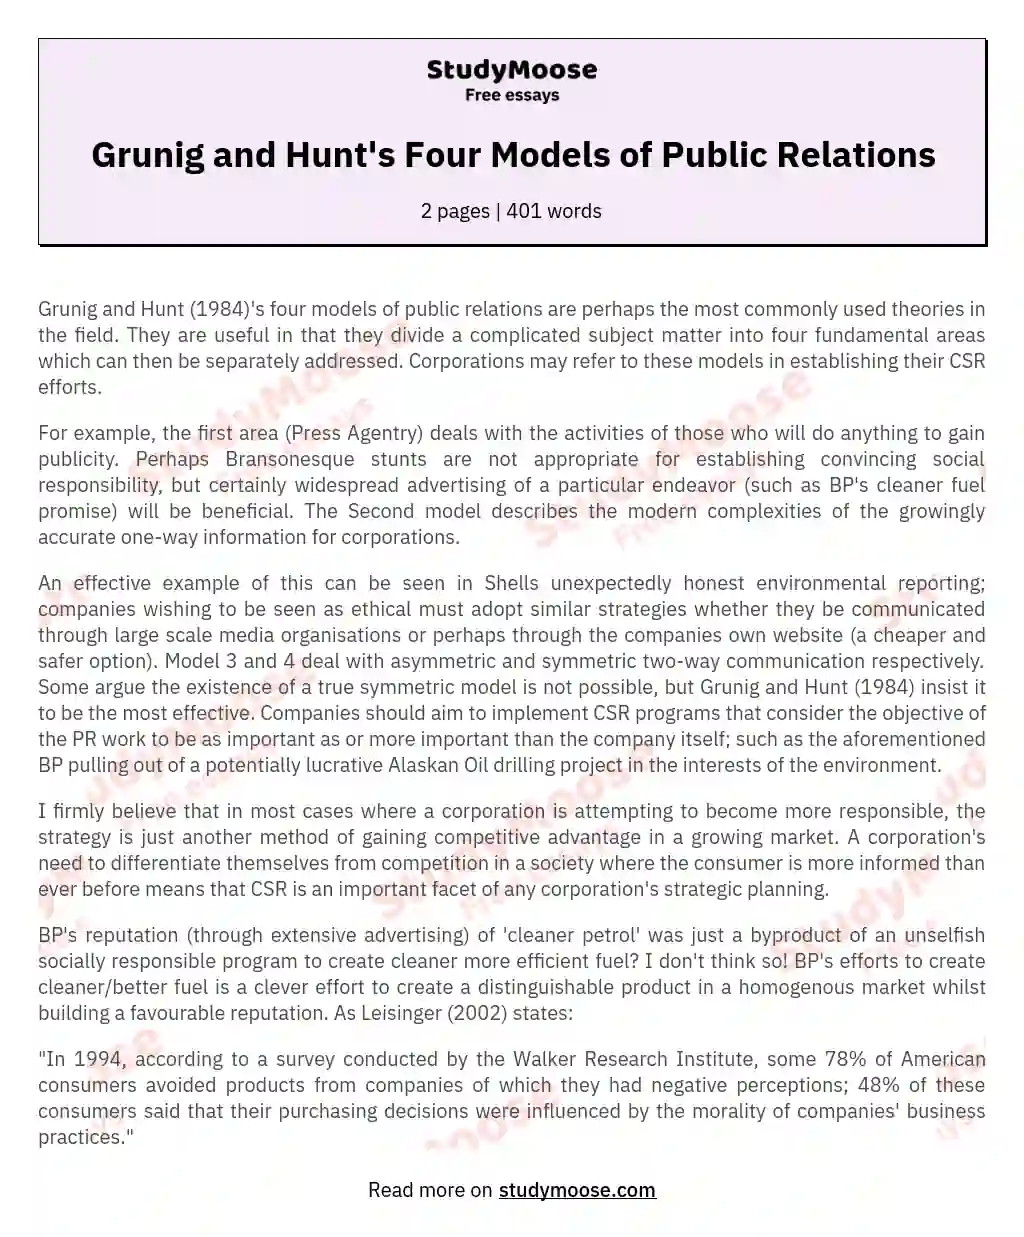 Grunig and Hunt's Four Models of Public Relations essay